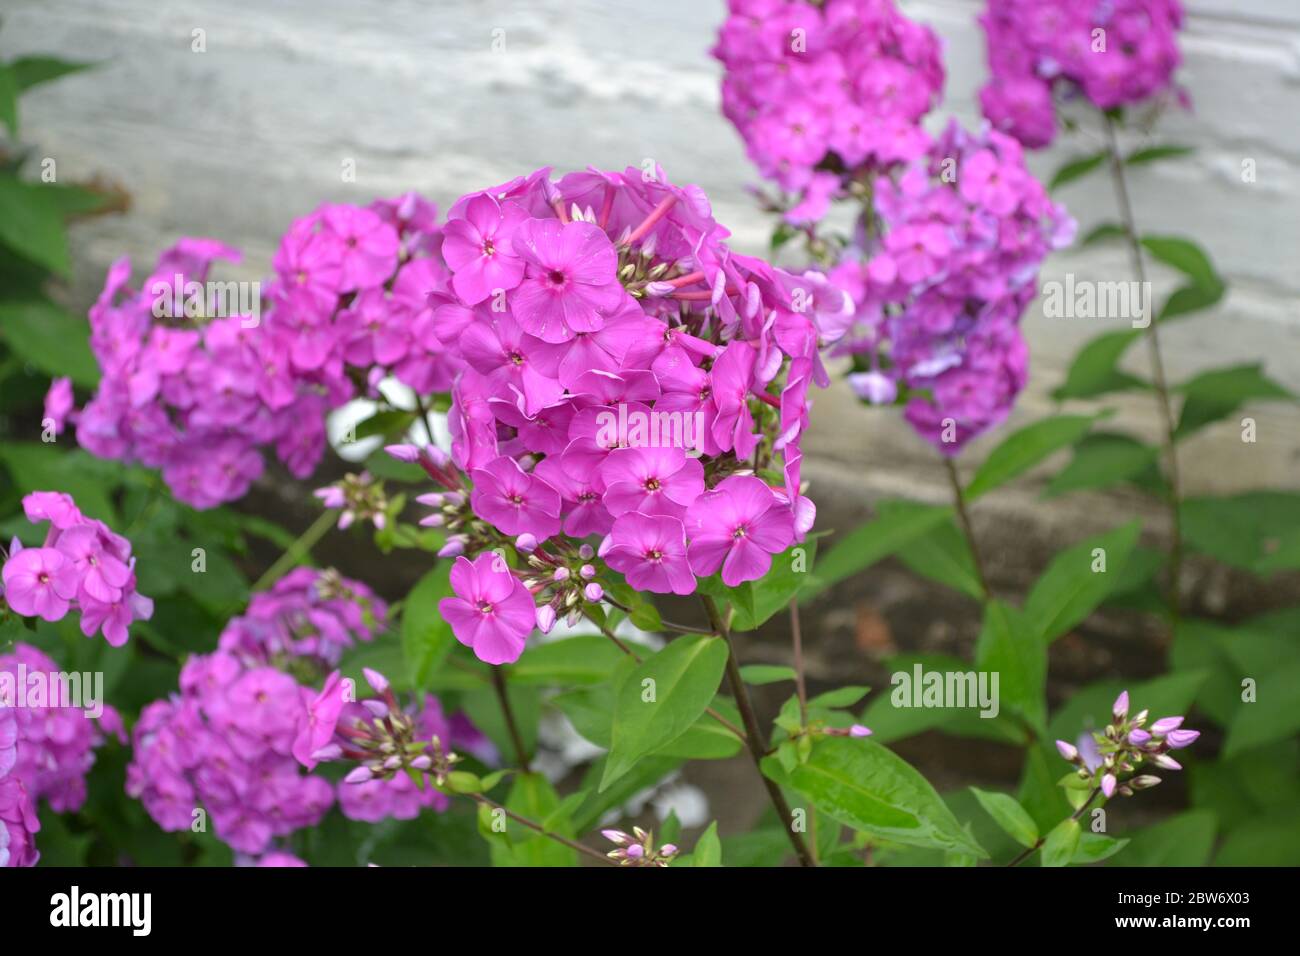 Green leaves, bushes. Gardening. Home. Beautiful inflorescences. Phlox flower. Perennial herbaceous plant. High branches. Purple flowers Stock Photo